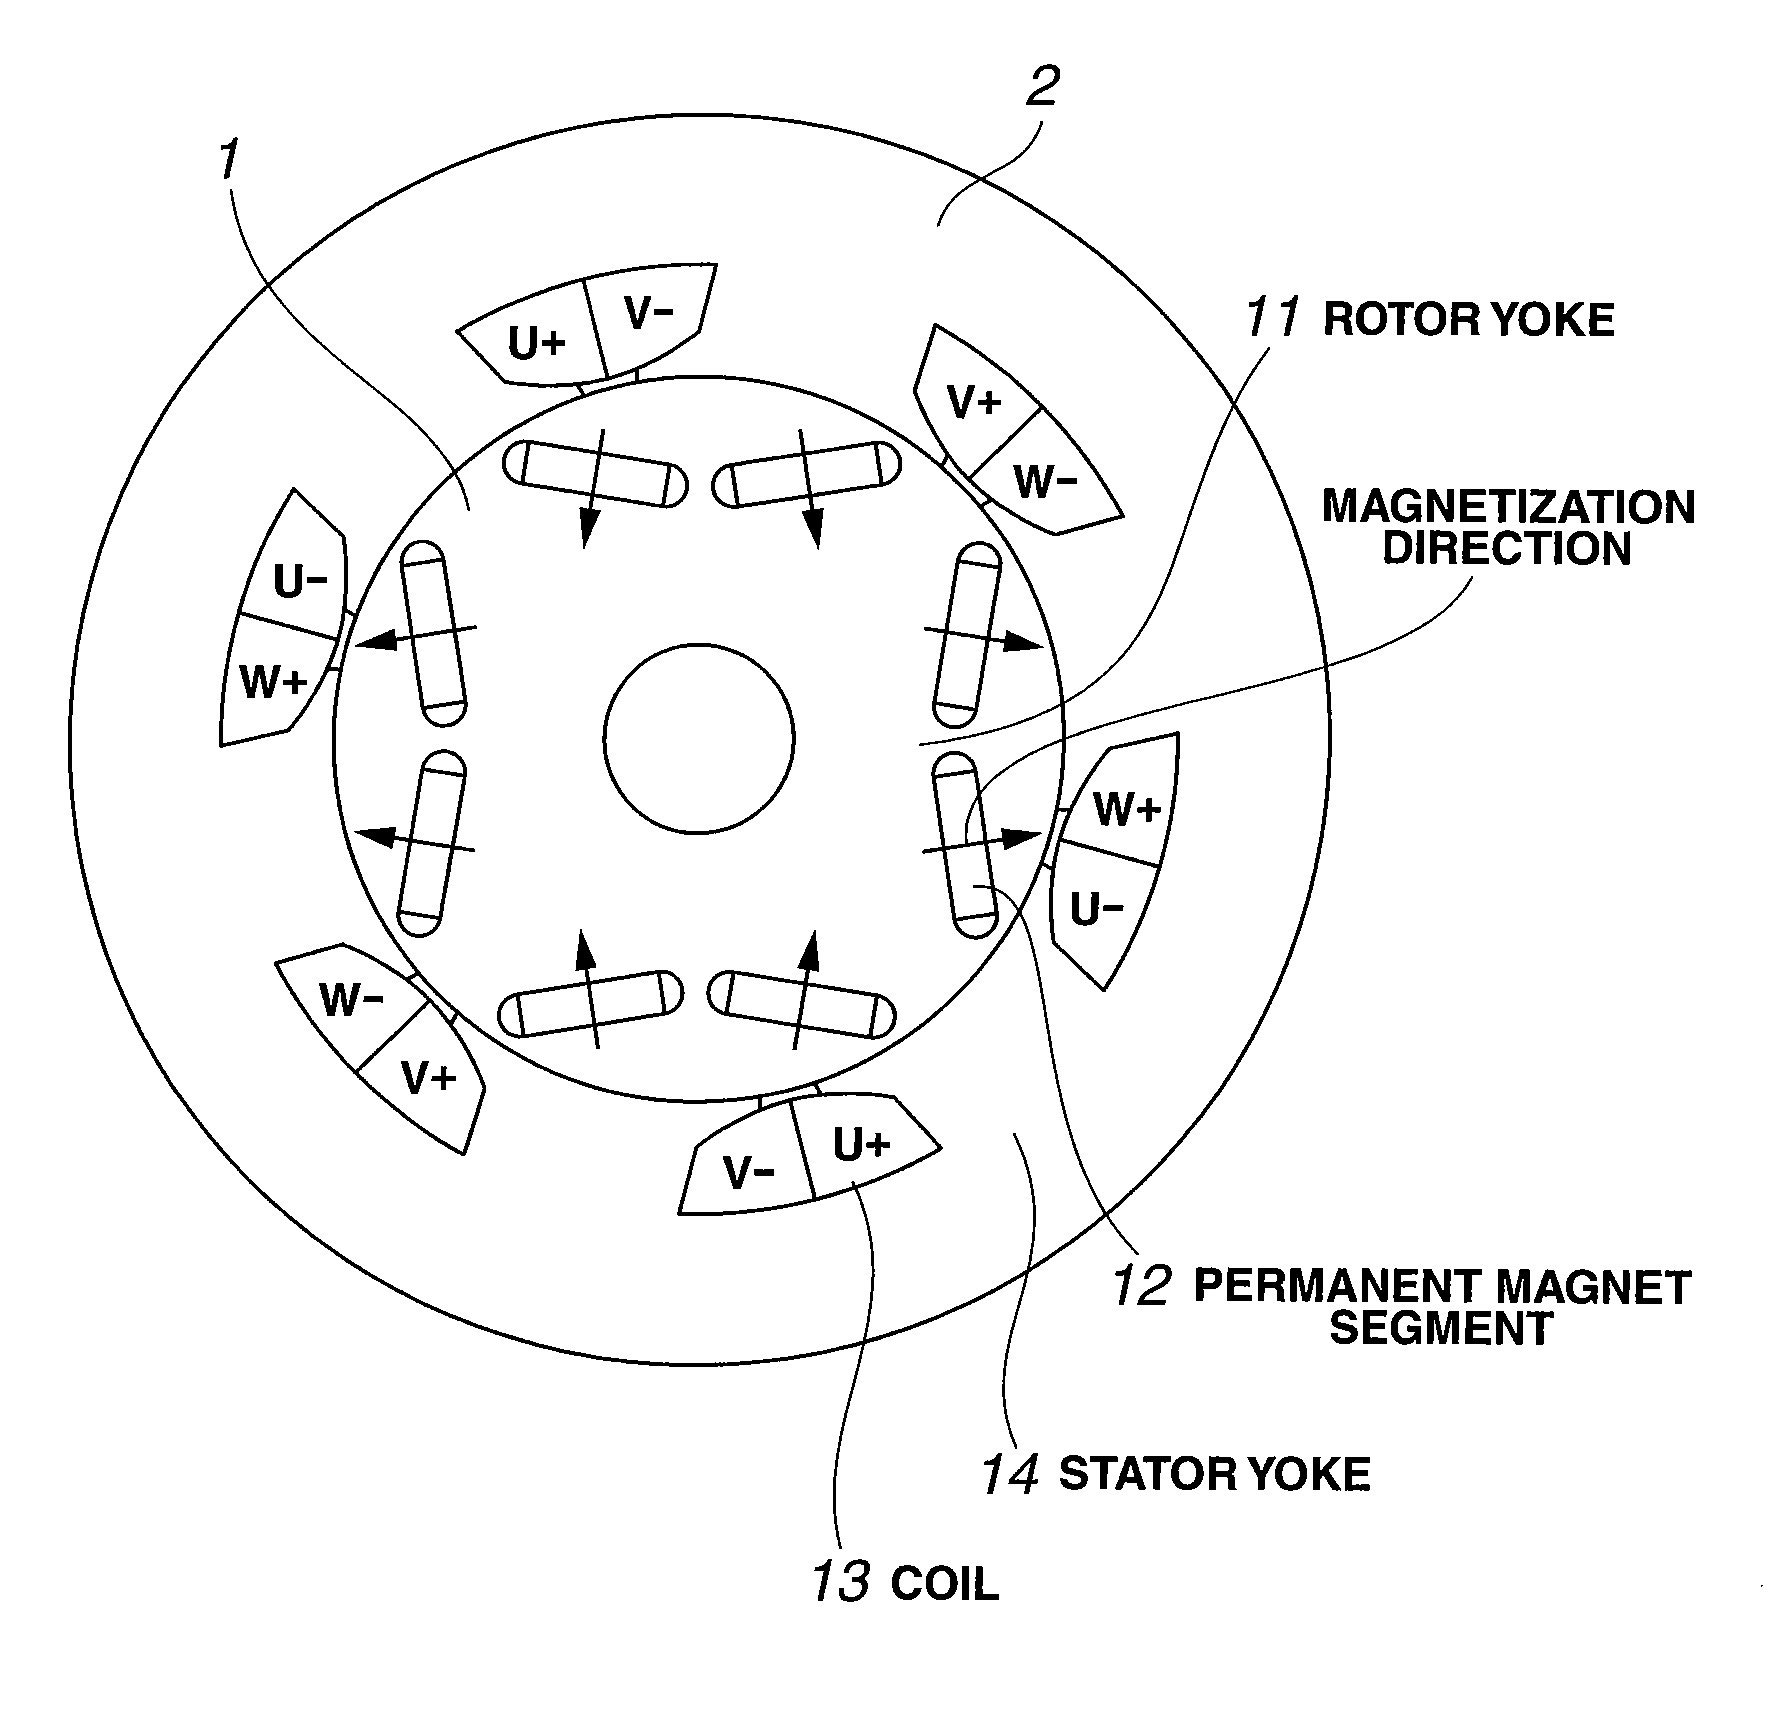 Method for assembling rotor for use in IPM rotary machine